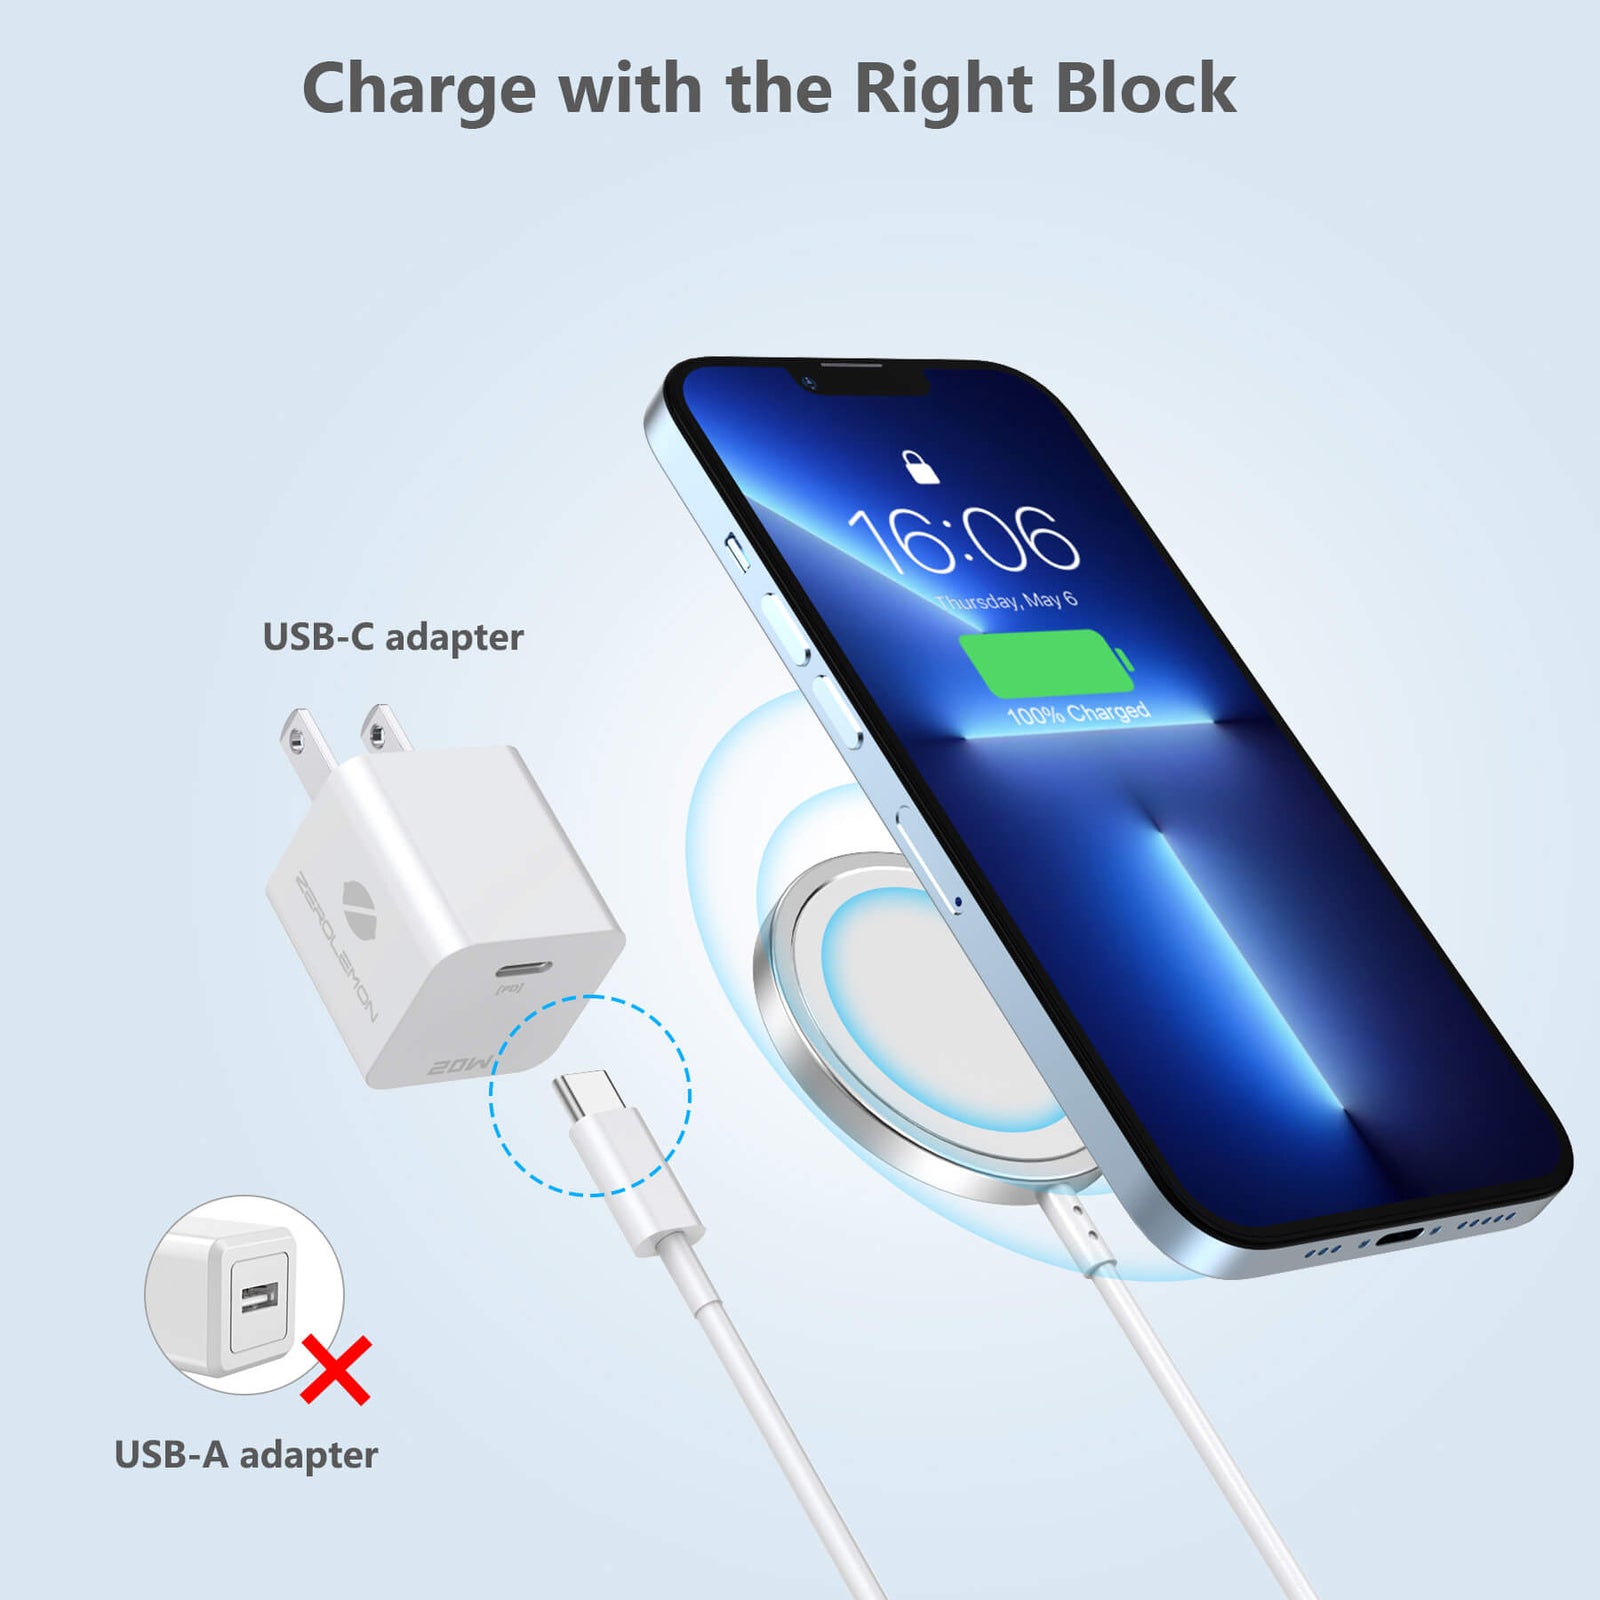 Apple MagSafe Charger Wireless Pad & USB-C Cable